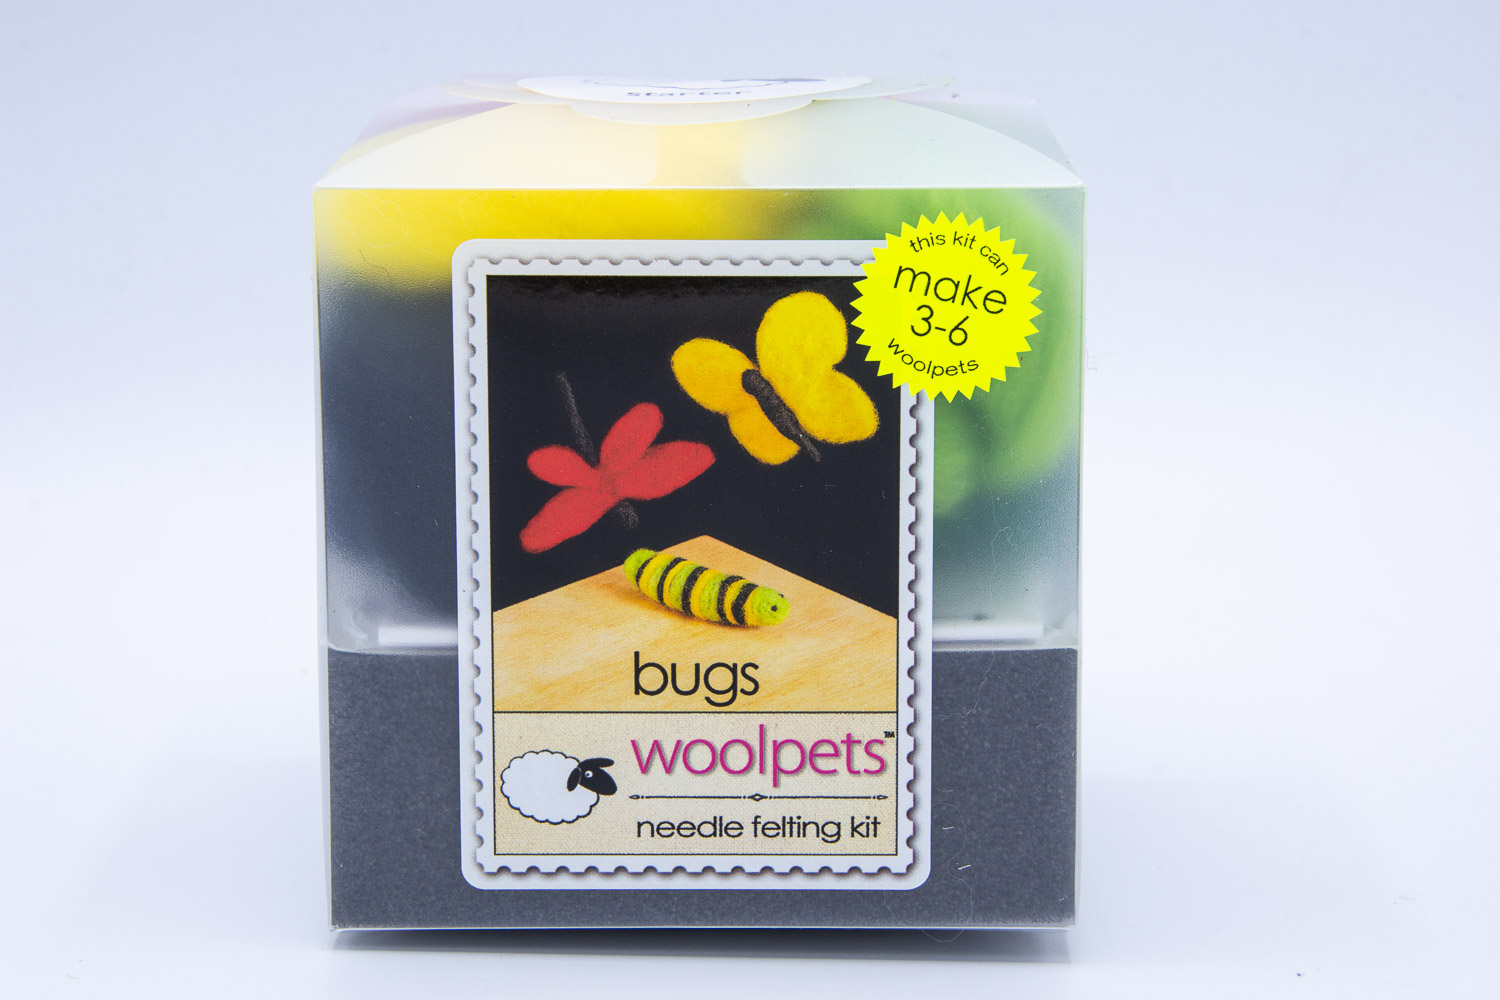 Woolpets Puppies Wool Needle Felting Craft Kit. Made in The USA.